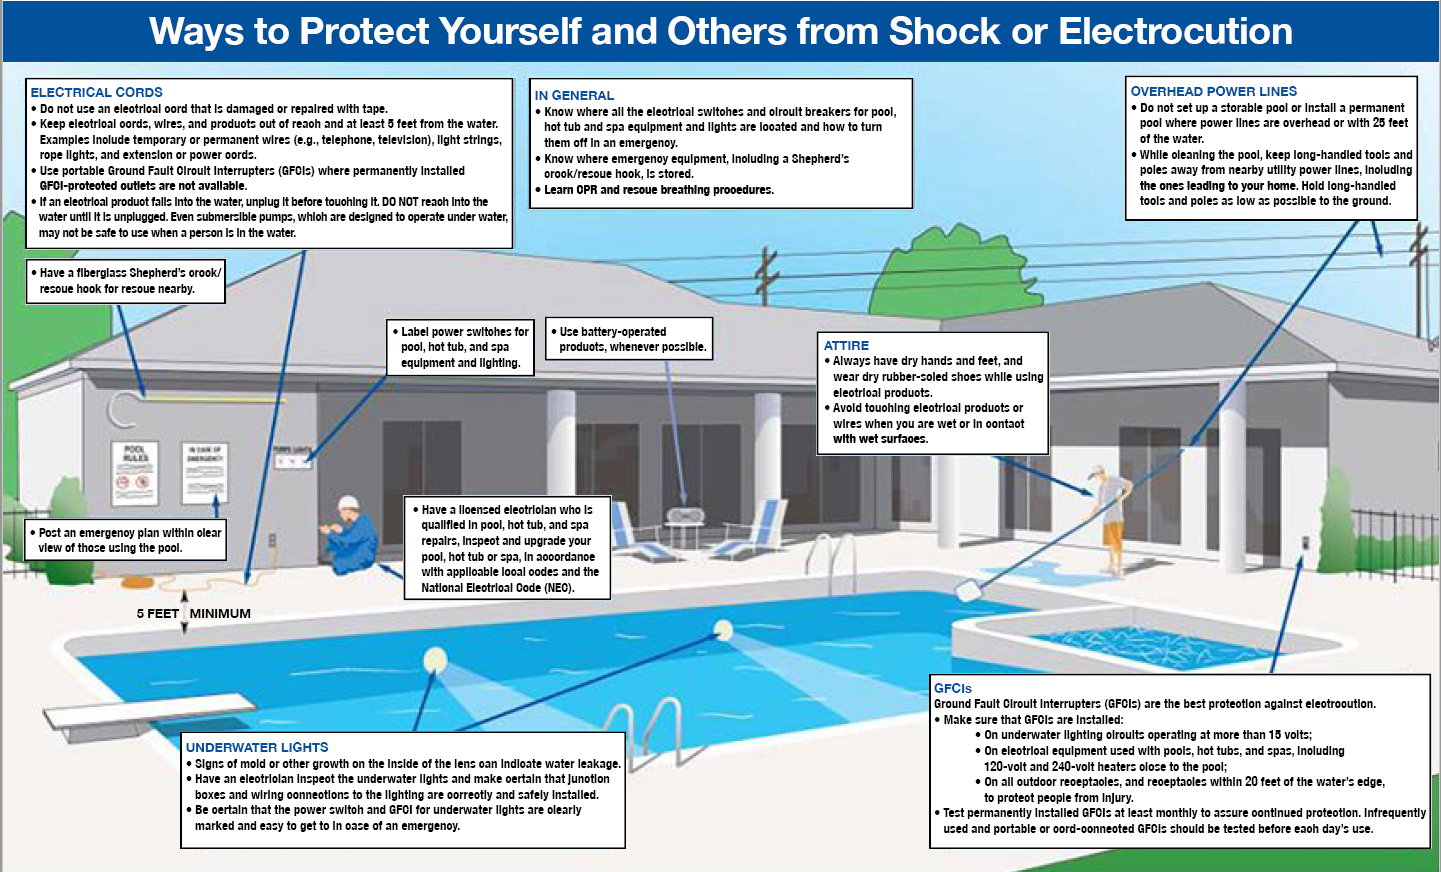 Do you need an electrician to install an above ground pool?